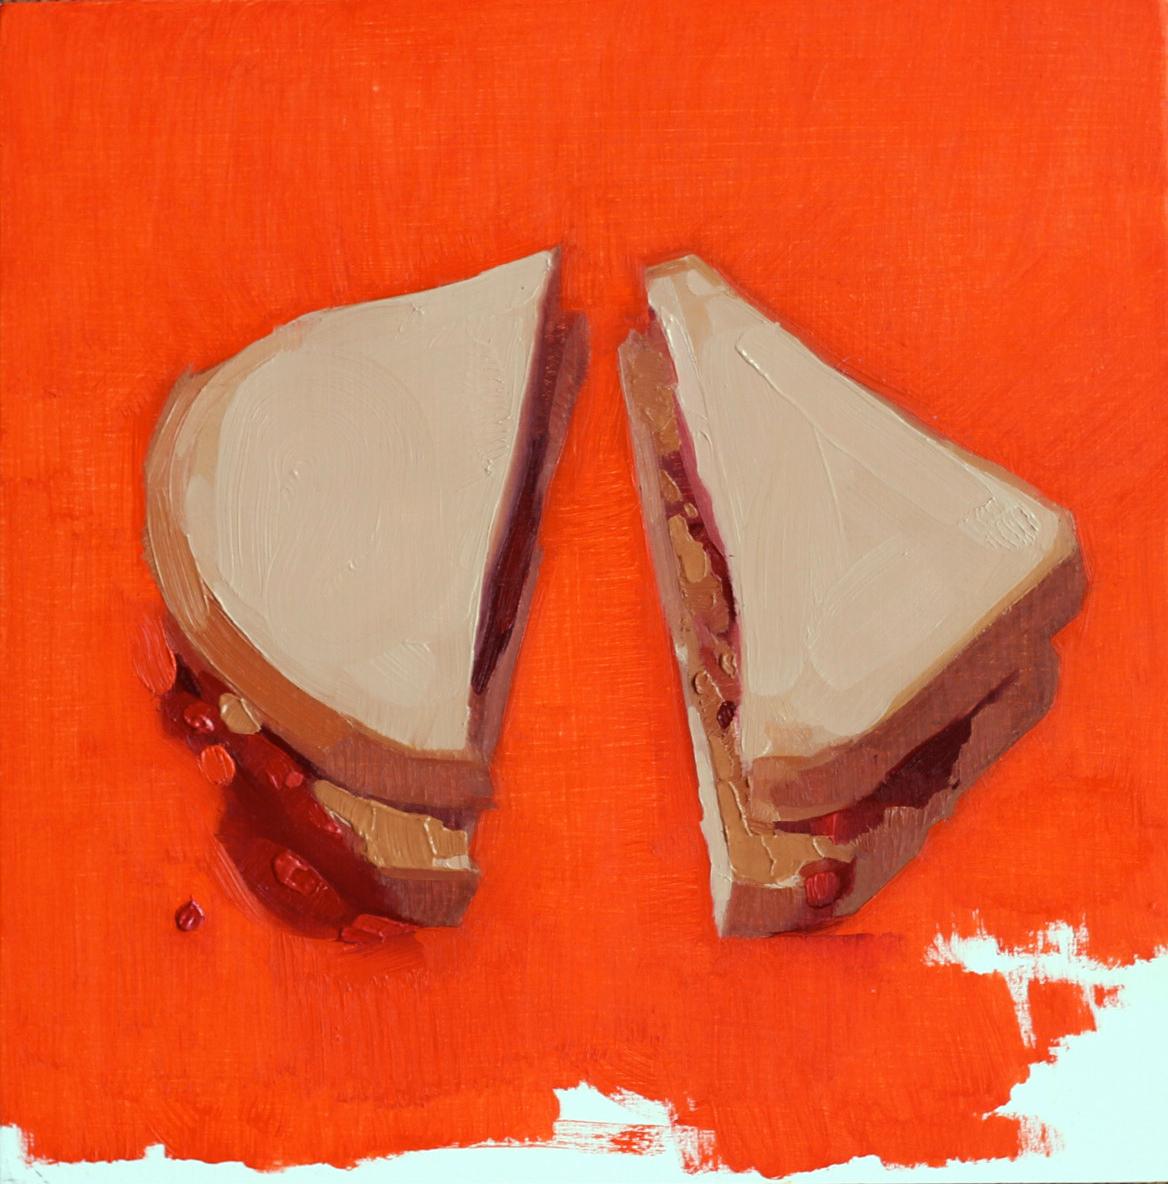 Felicia Forte Still-Life Painting - "I Feel Useful" Original oil painting of Sandwich on Red